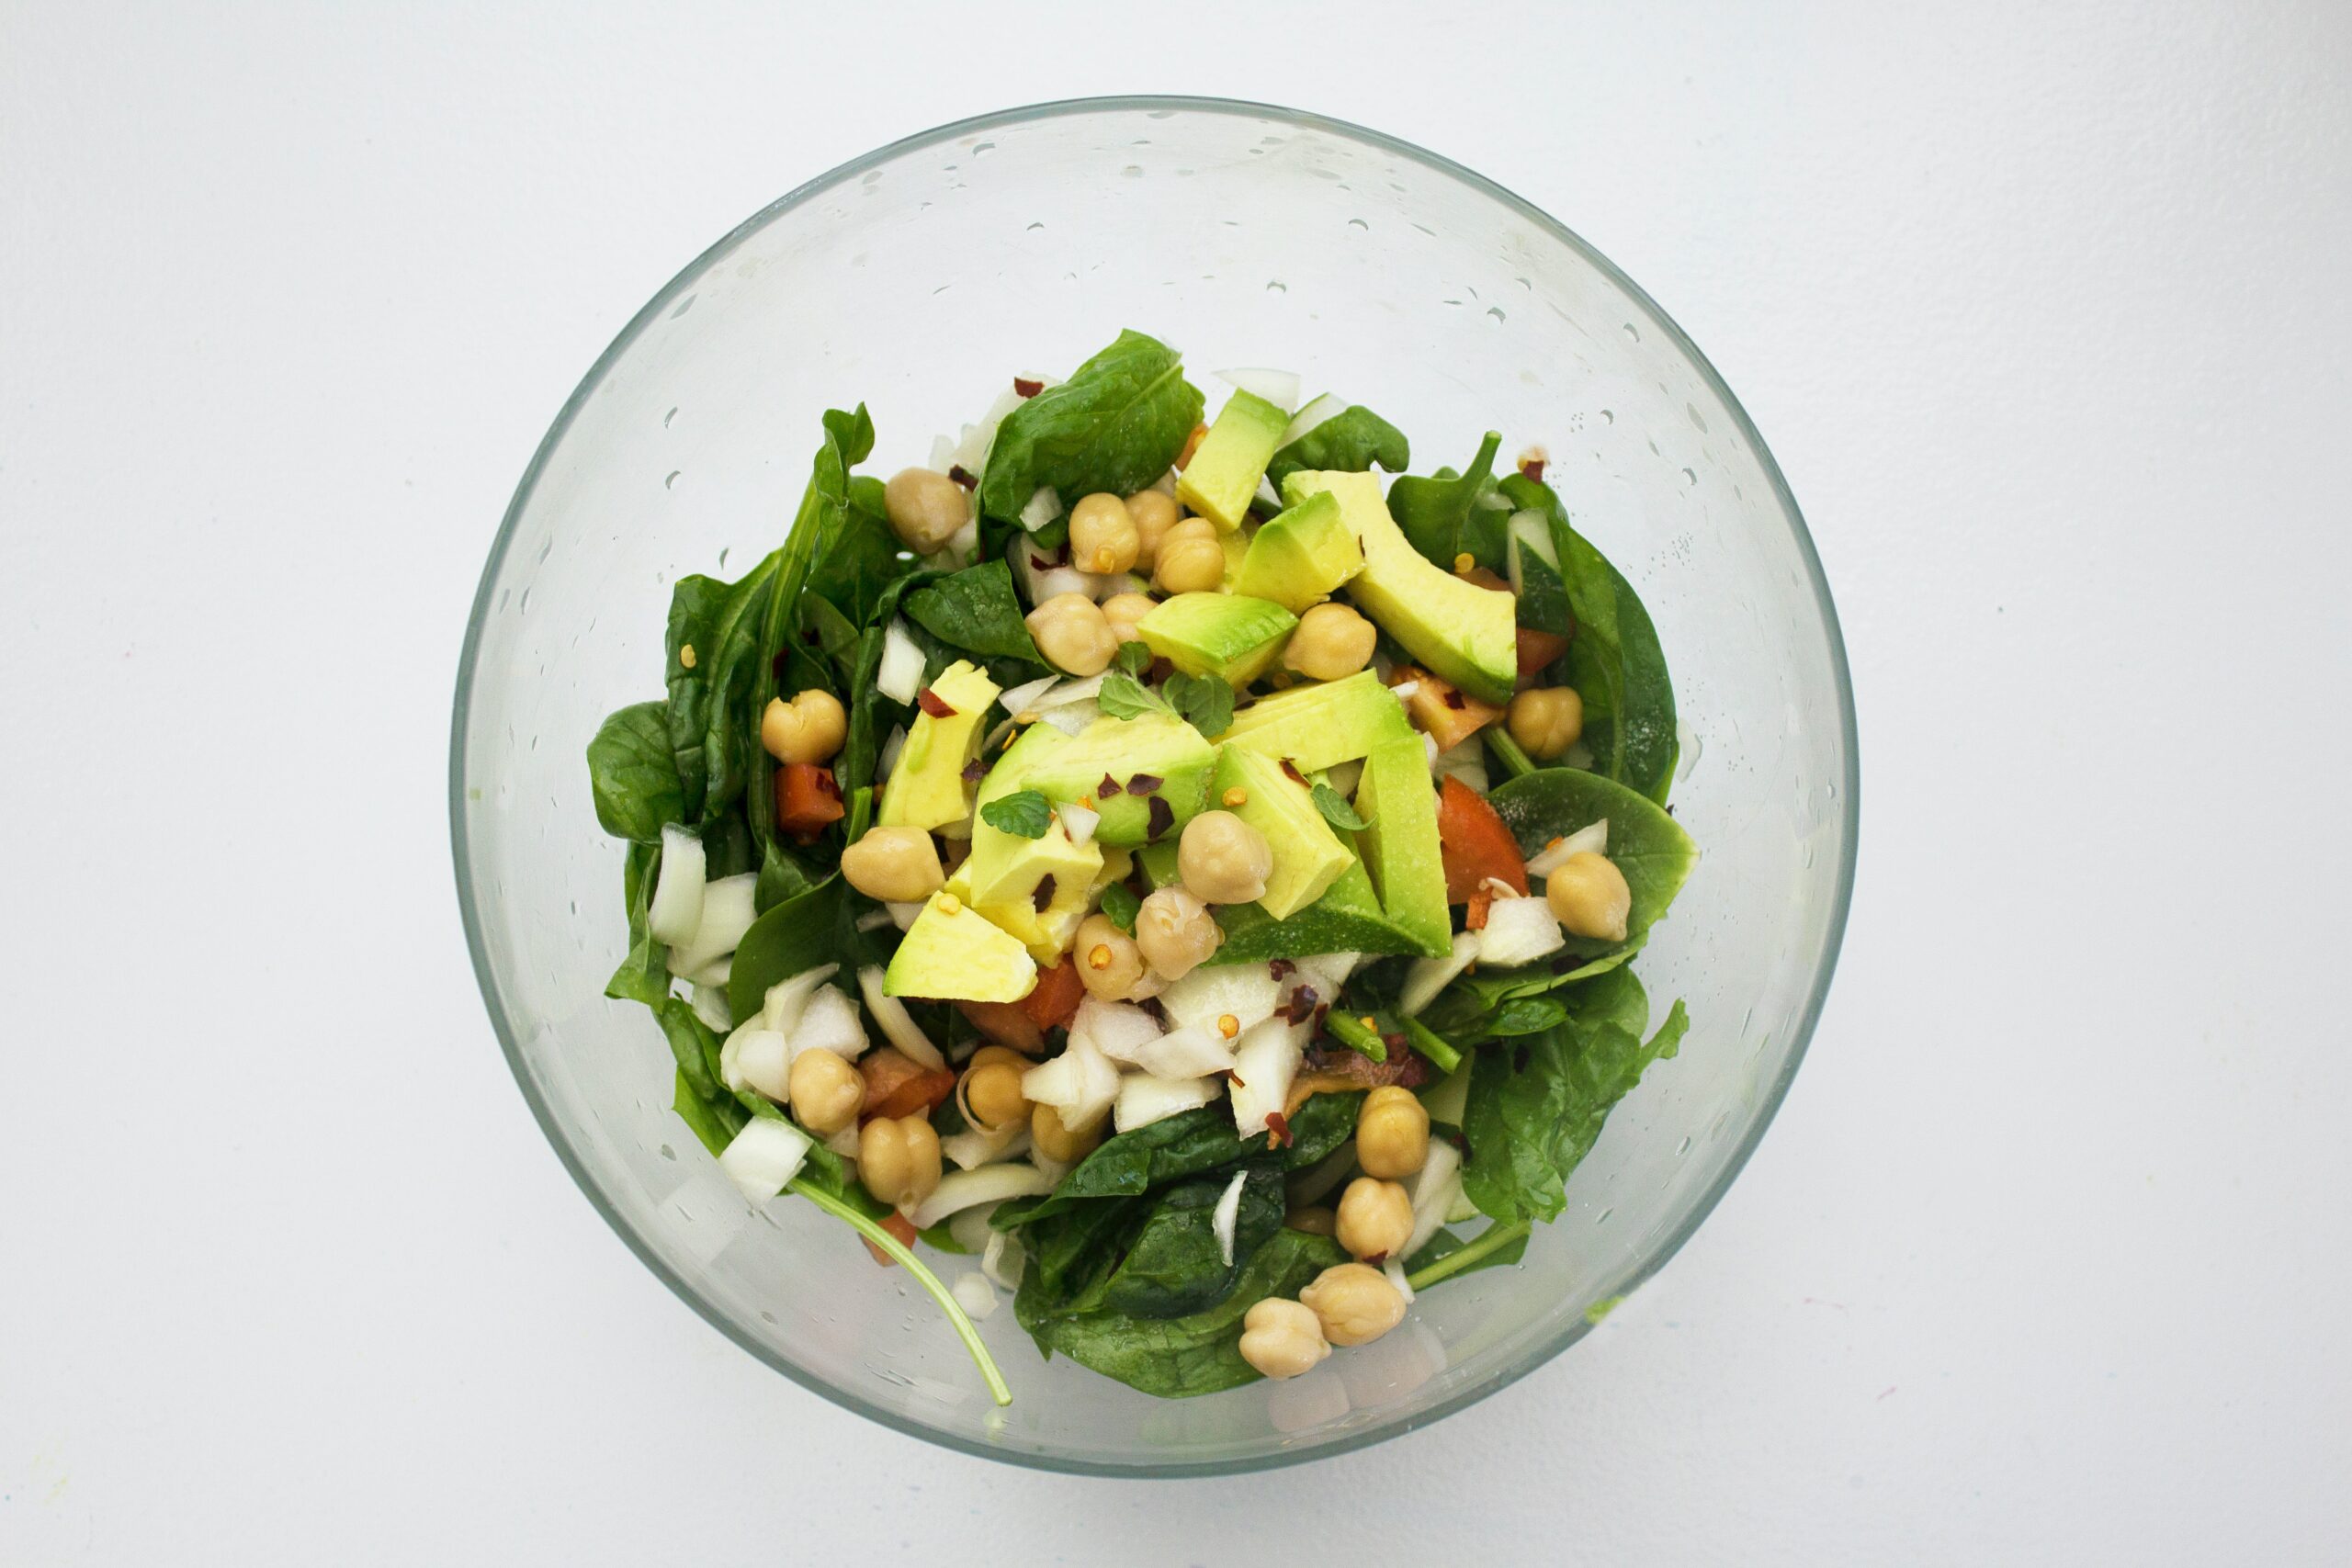 Chickpeas and other ingredients in a salad